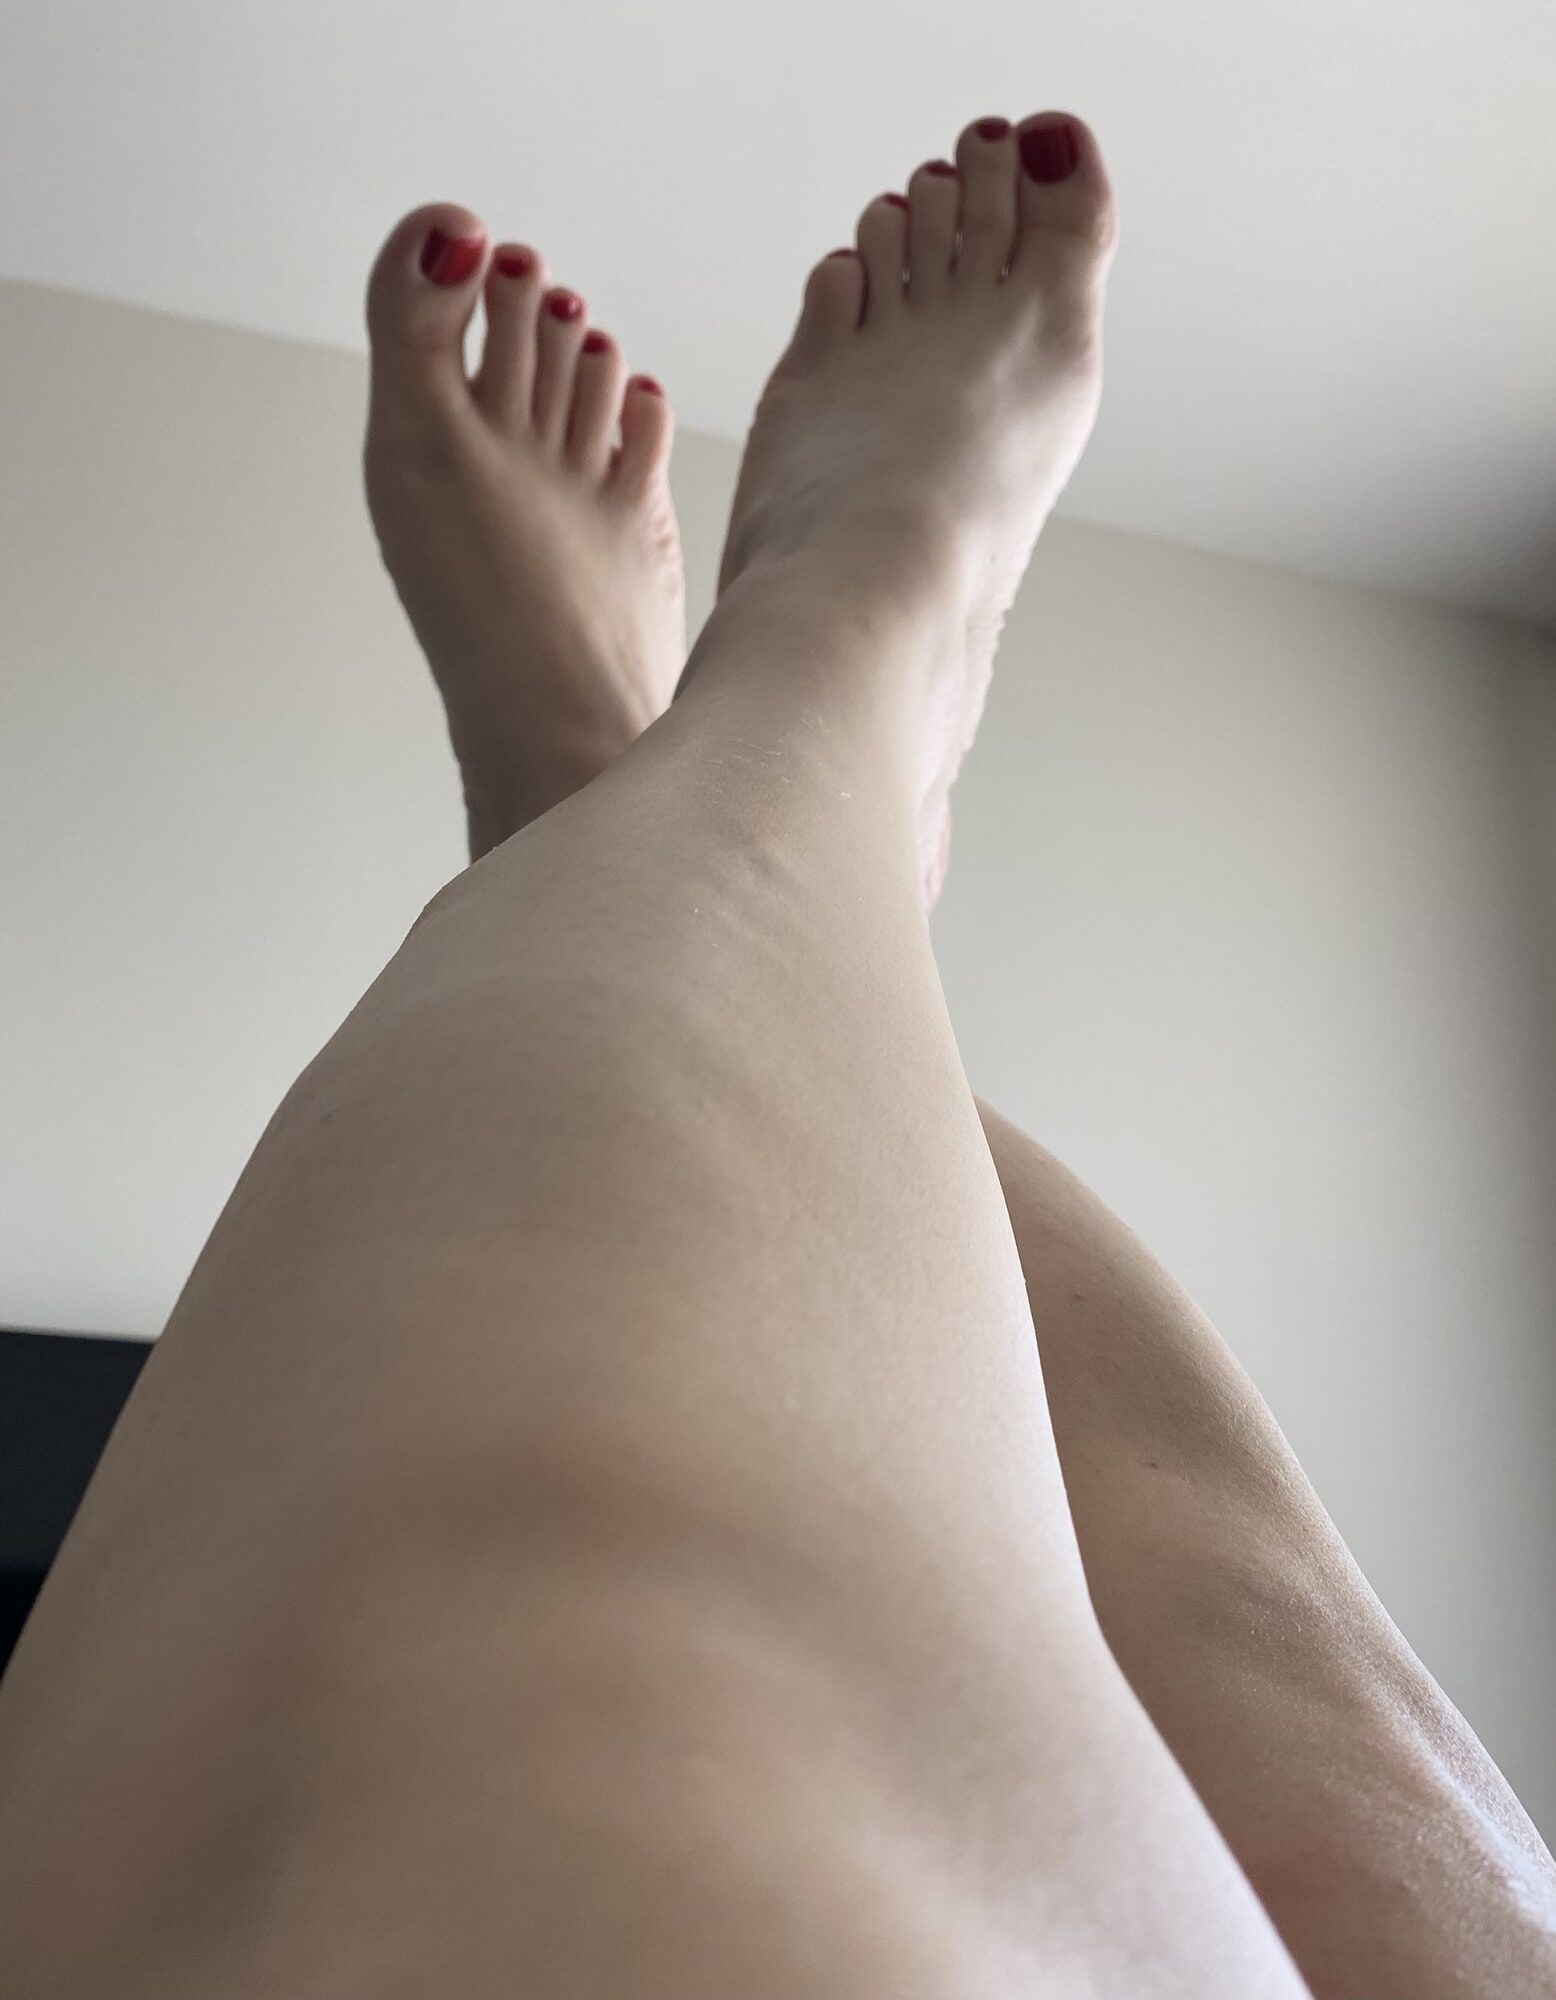 My shaved legs and polished nails #43